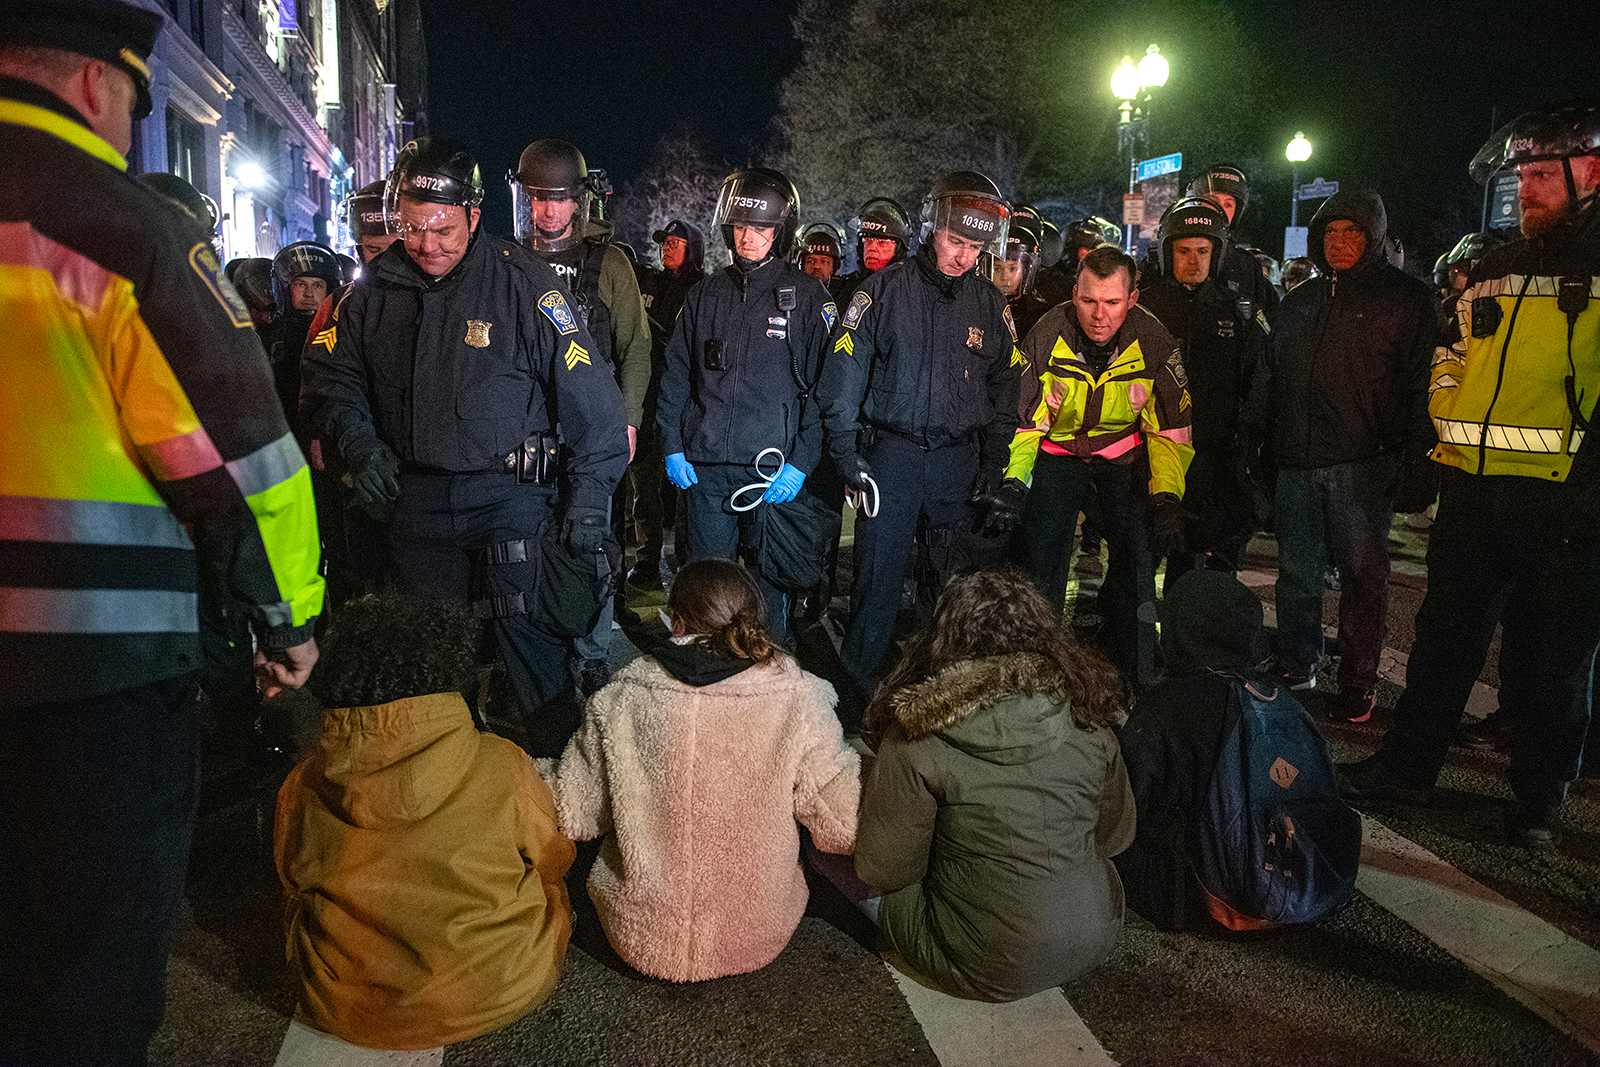 Police move in to arrest pro-Palestinian supporters who were blocking the road after the Emerson College Palestinian protest camp was cleared by police in Boston, Massachusetts, on April 25. 